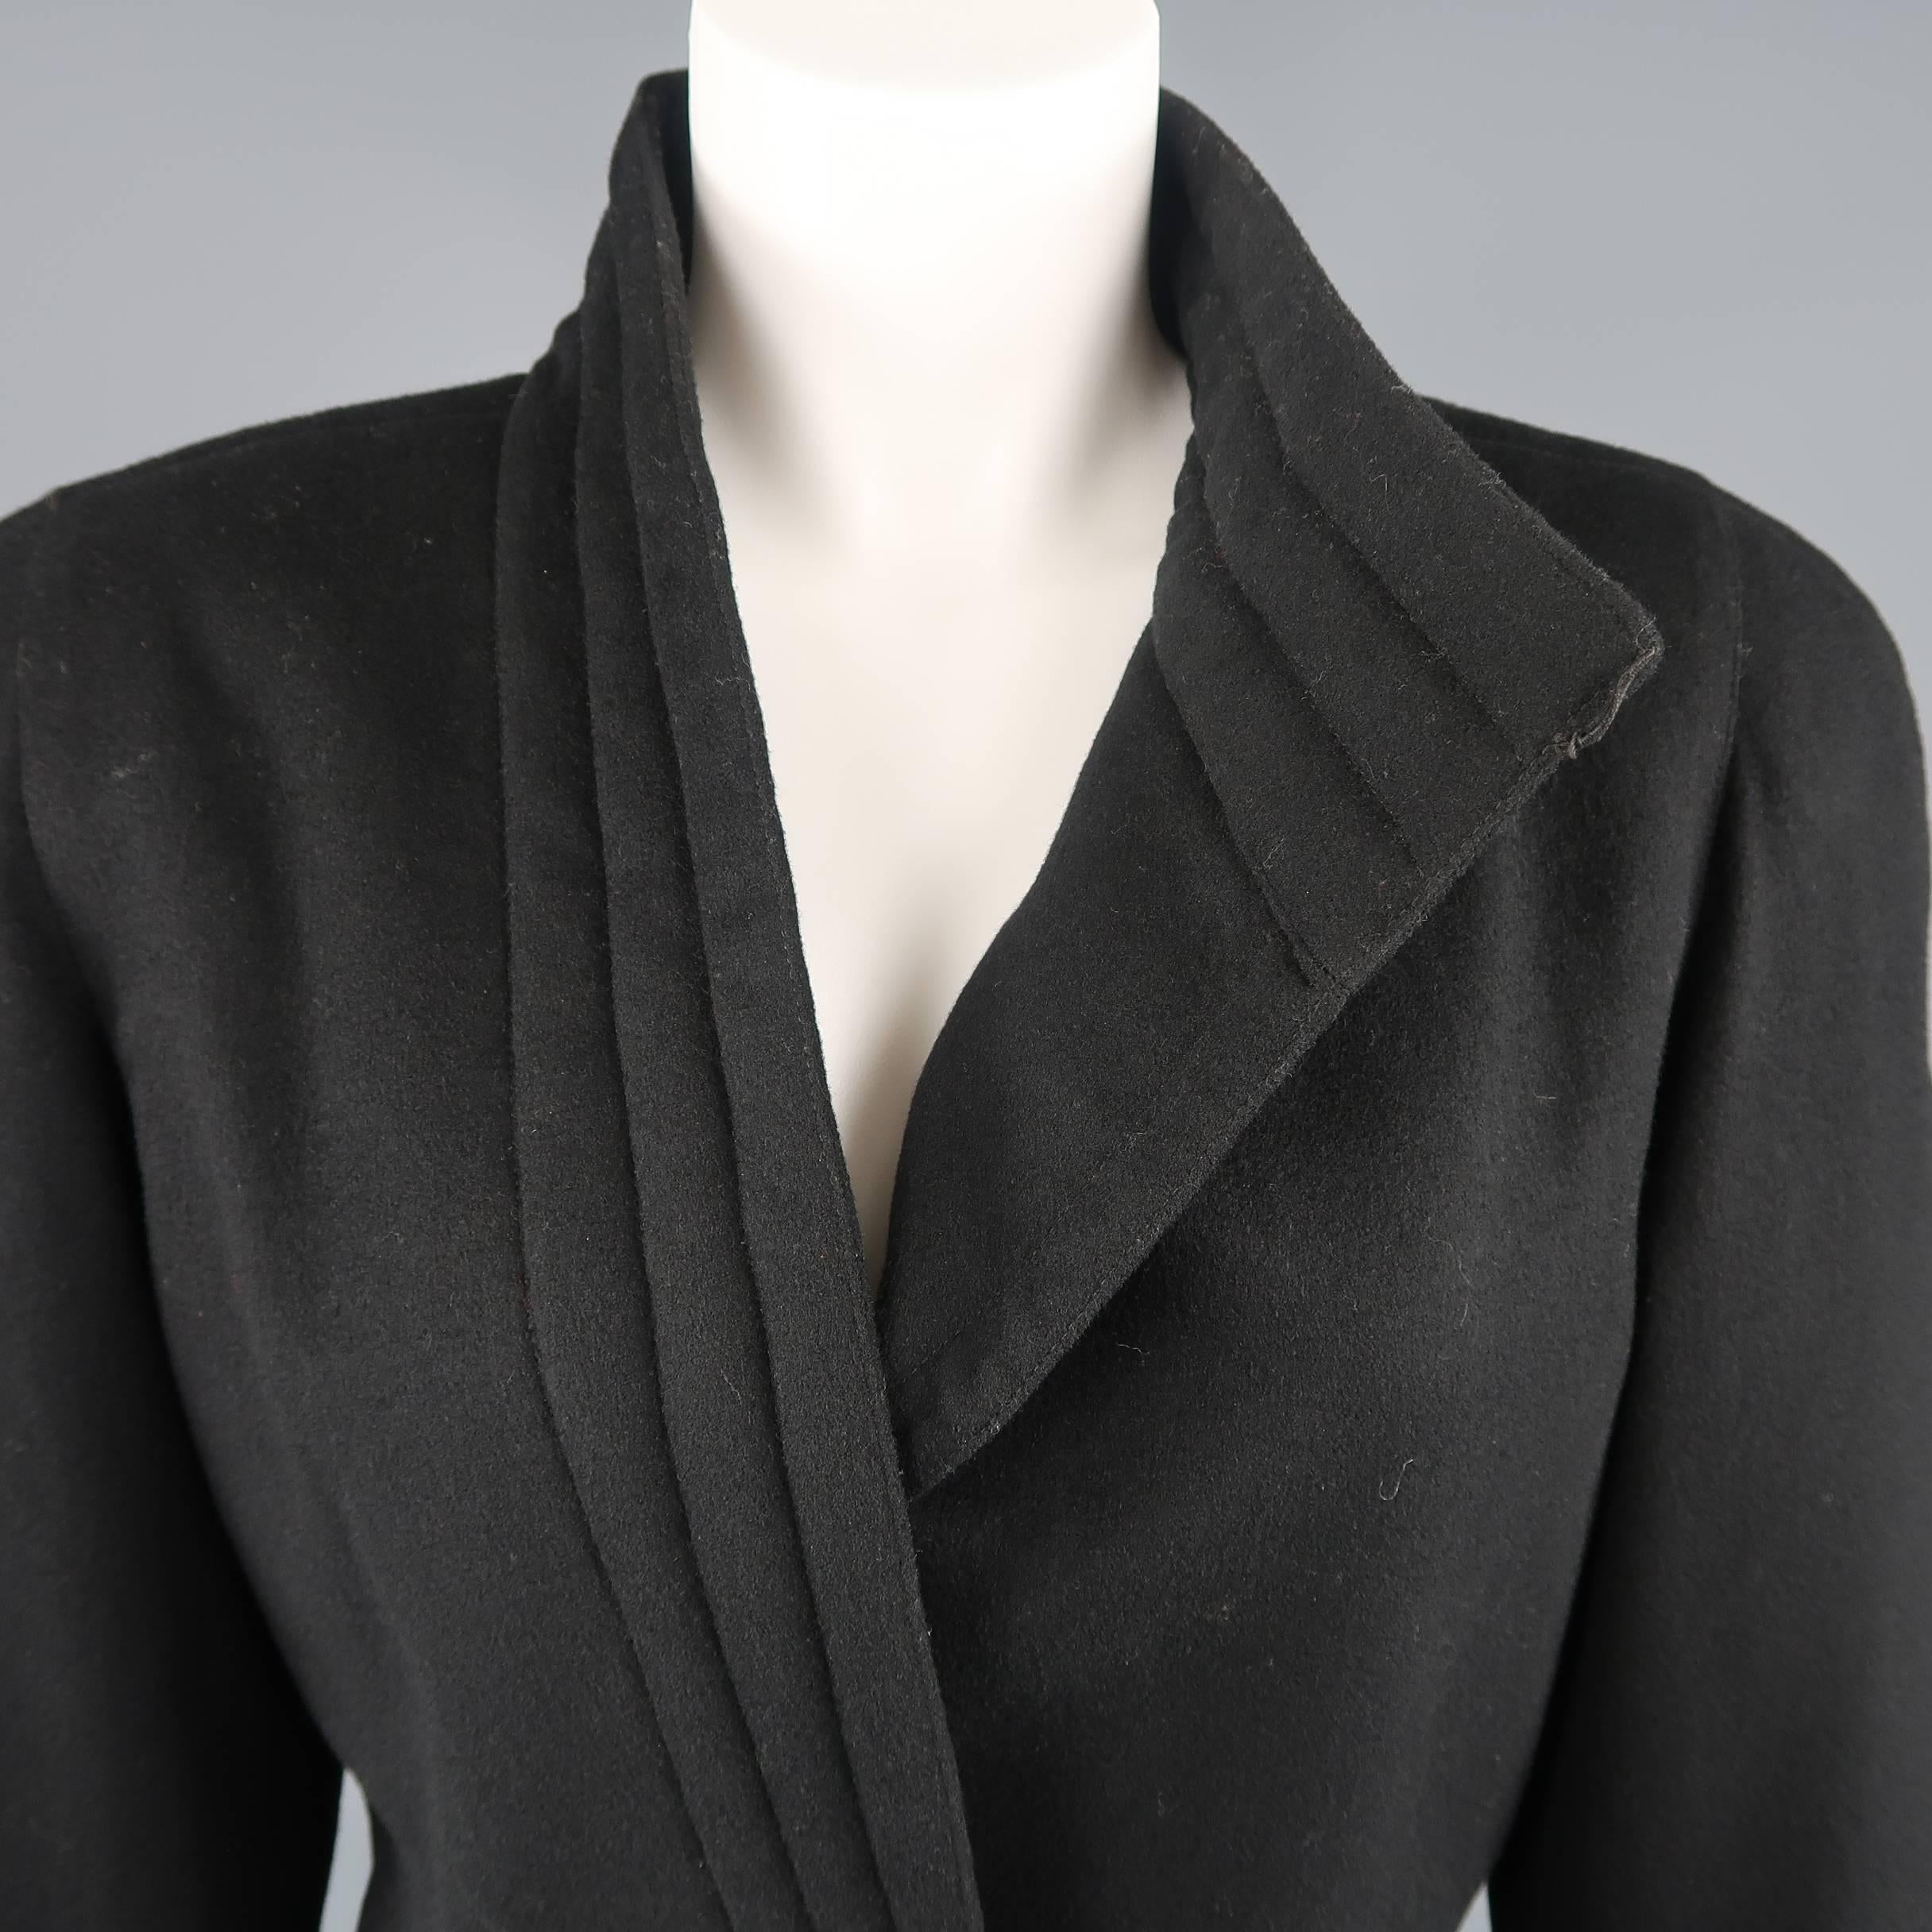 Vintage 1980's Gianni Versace  jacket comes in black felt and features a quilted asymmetrical collar closure with gold tone metal button, strong shoulders, and slit pockets. Made in Italy.
 
Good Pre-Owned Condition.
Marked: (no size)
